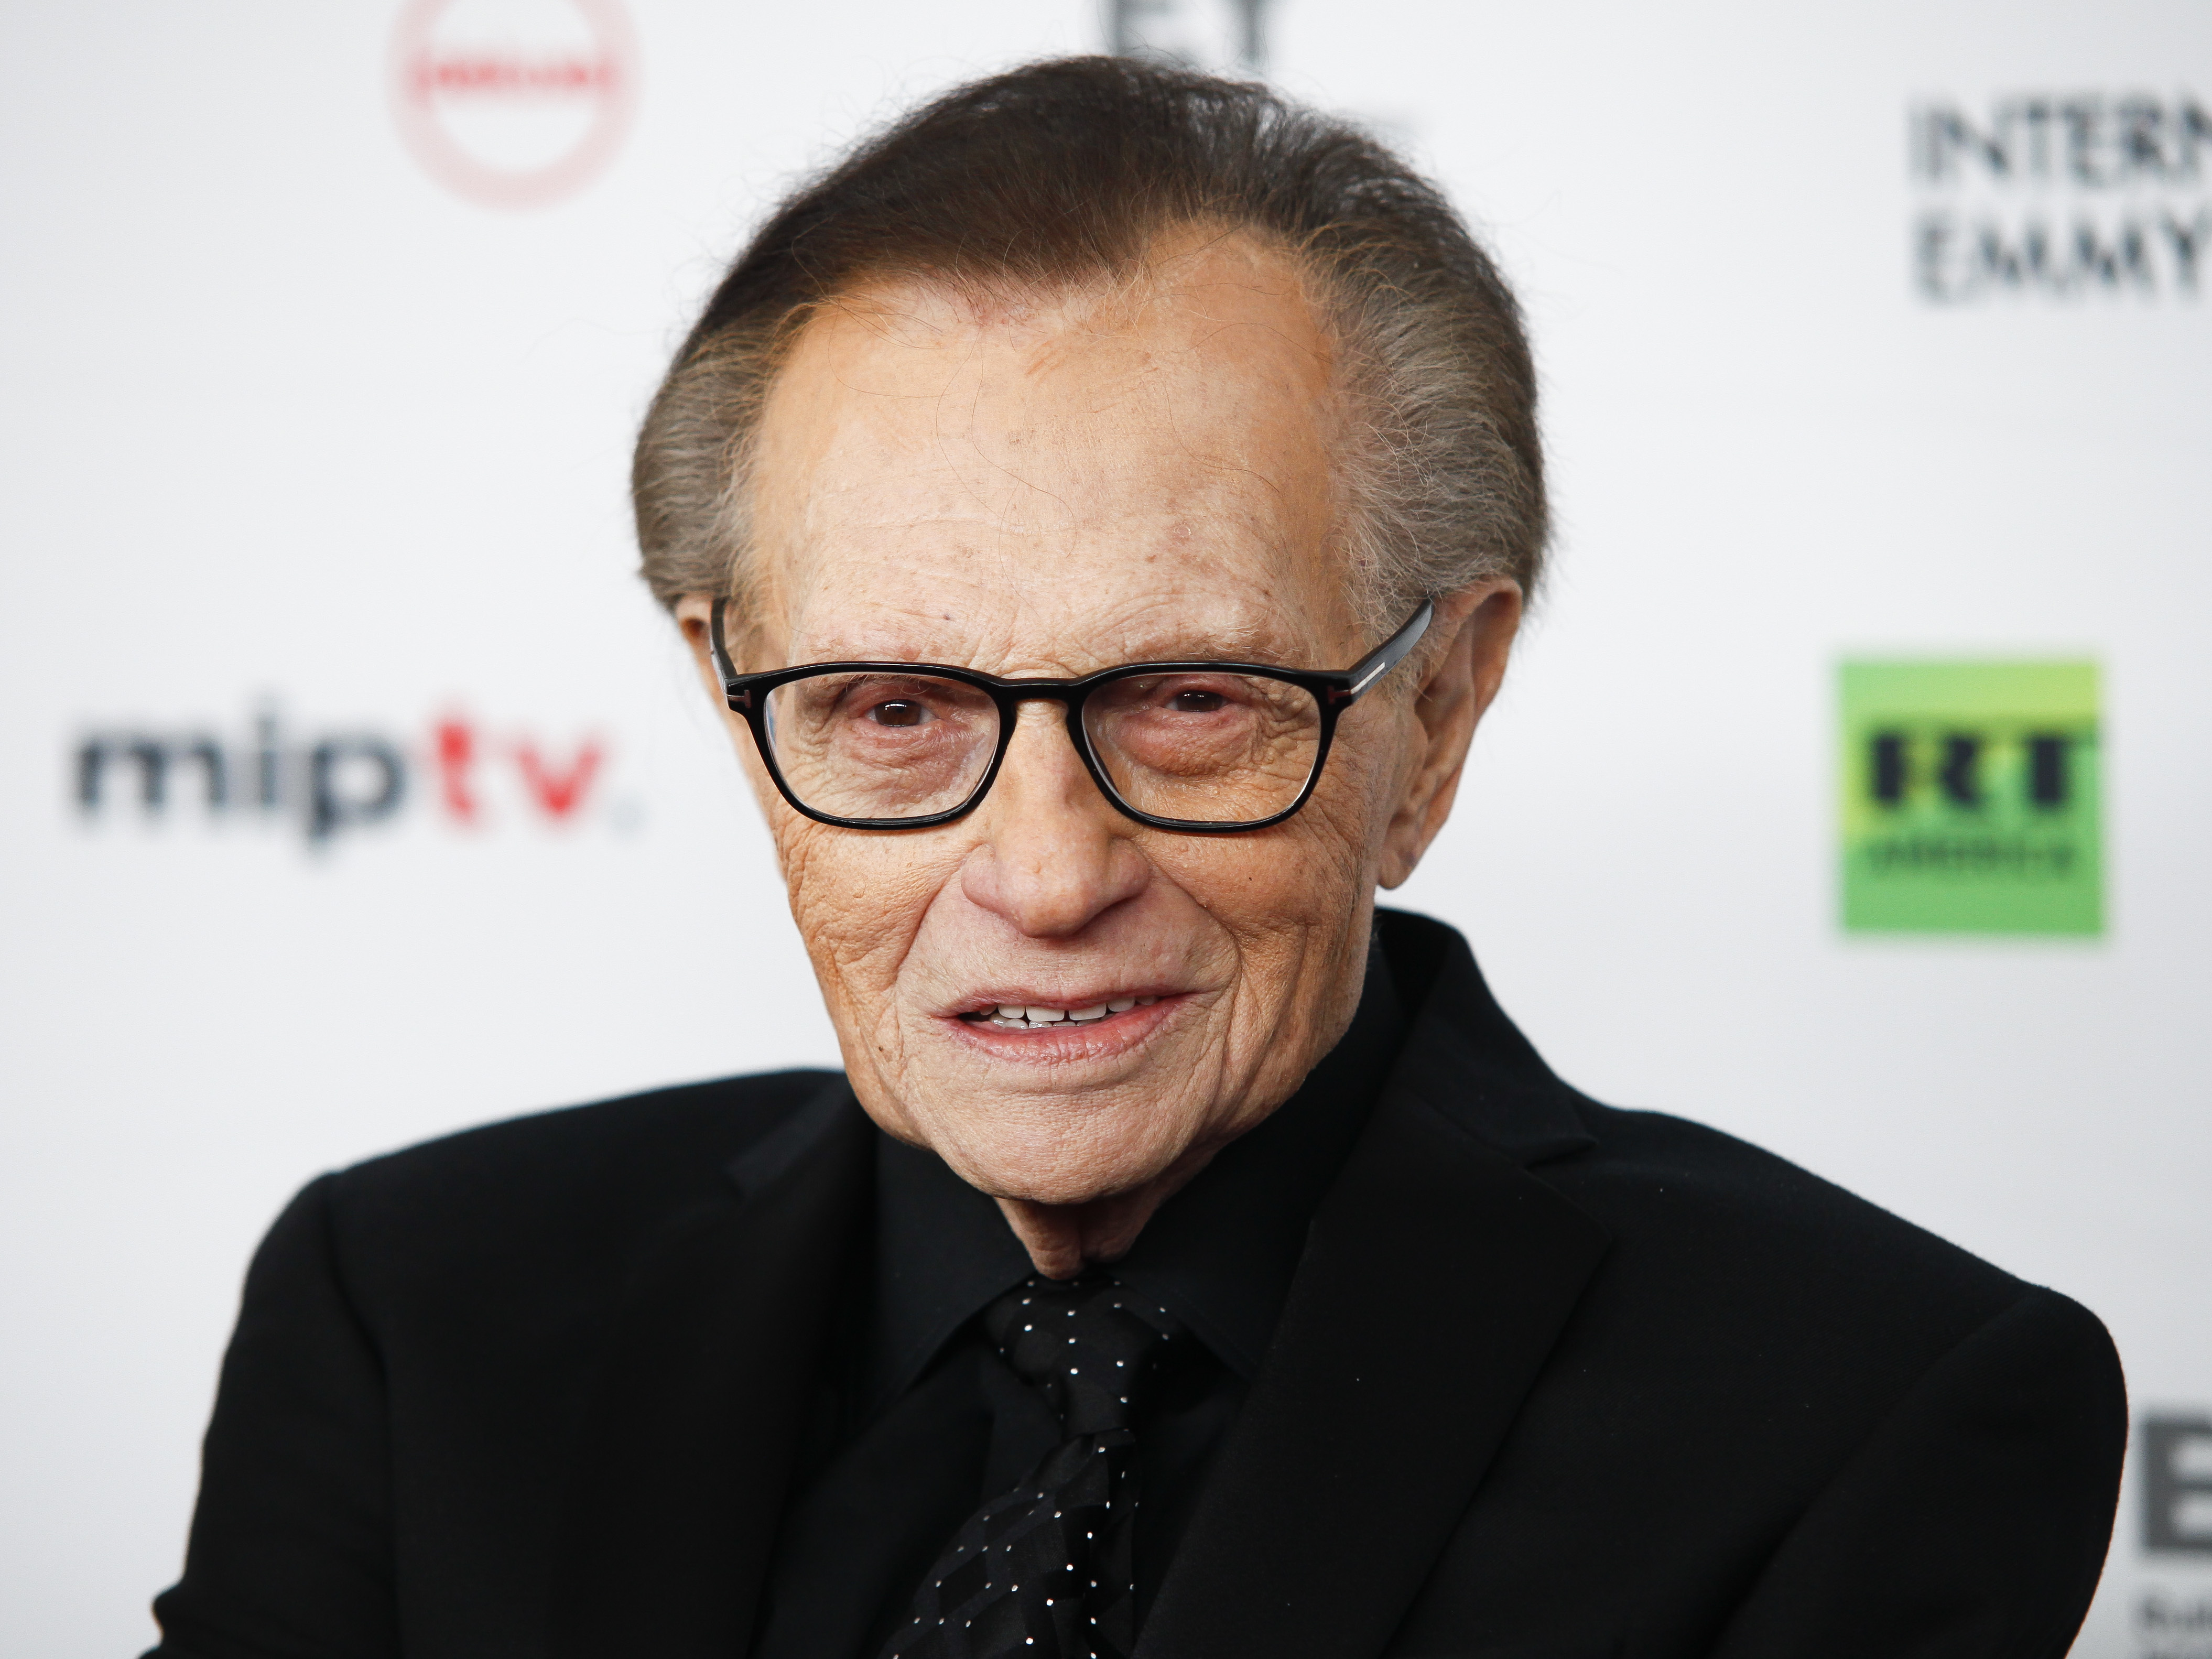 Larry King, Radio Host And Broadcasting Legend, Dies At 87